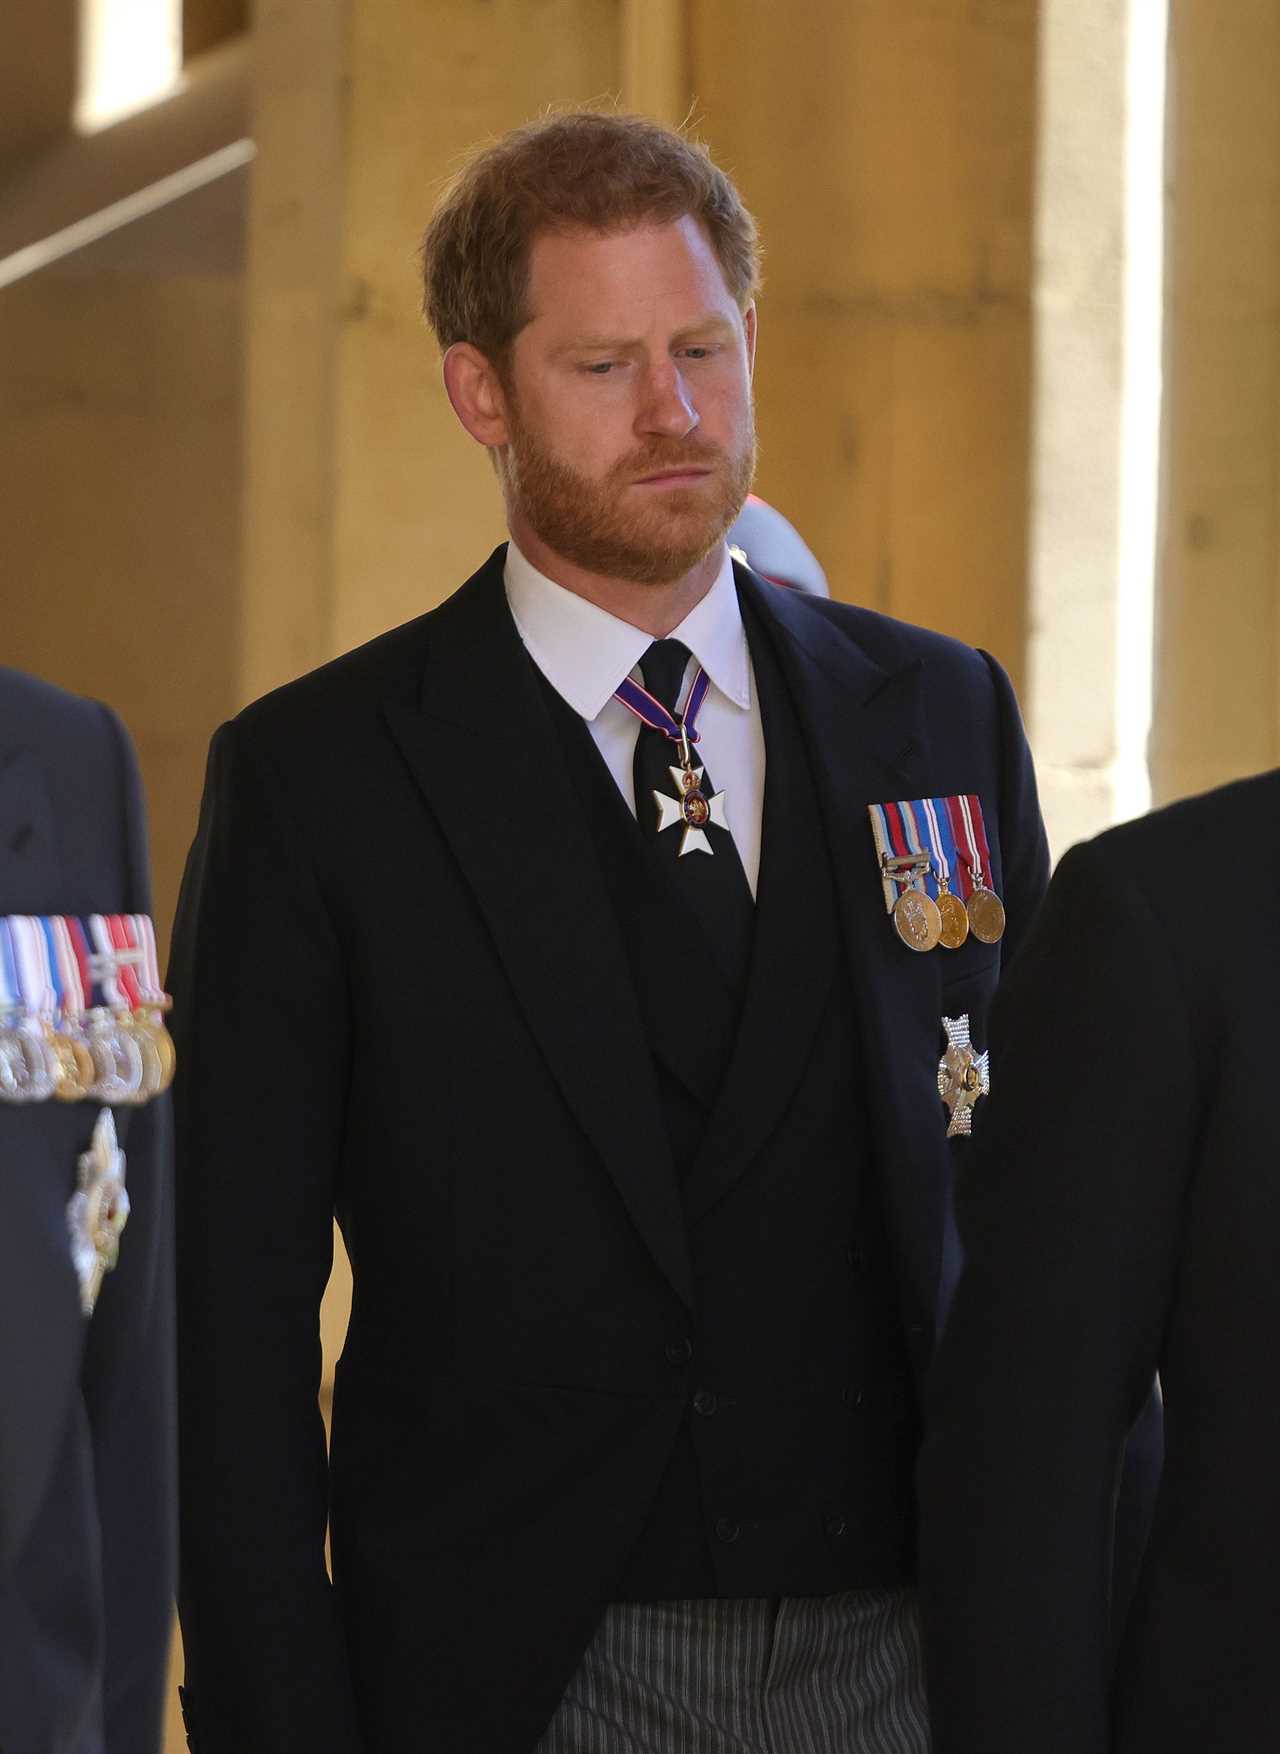 Is it vanity or stupidity that drives Prince Harry to continue his legal fight to have armed guards?